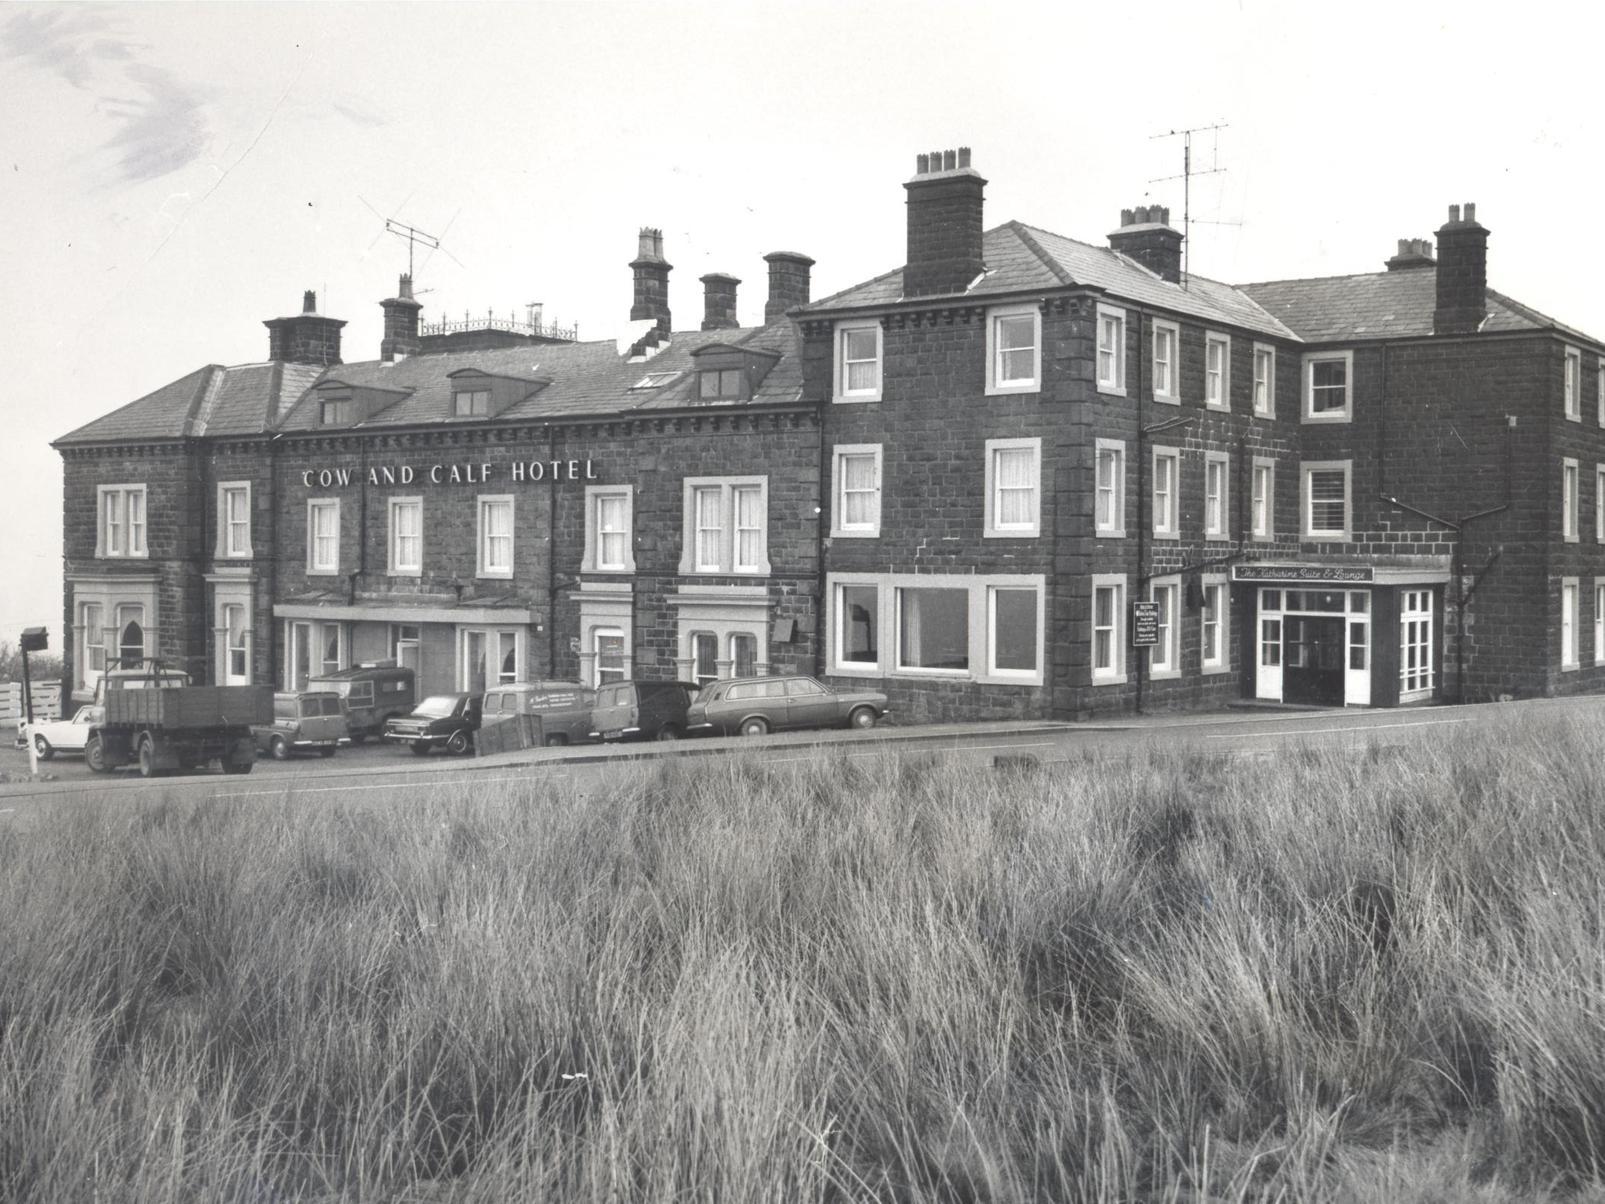 The Cow and Calf Hotel in the early 1970s.